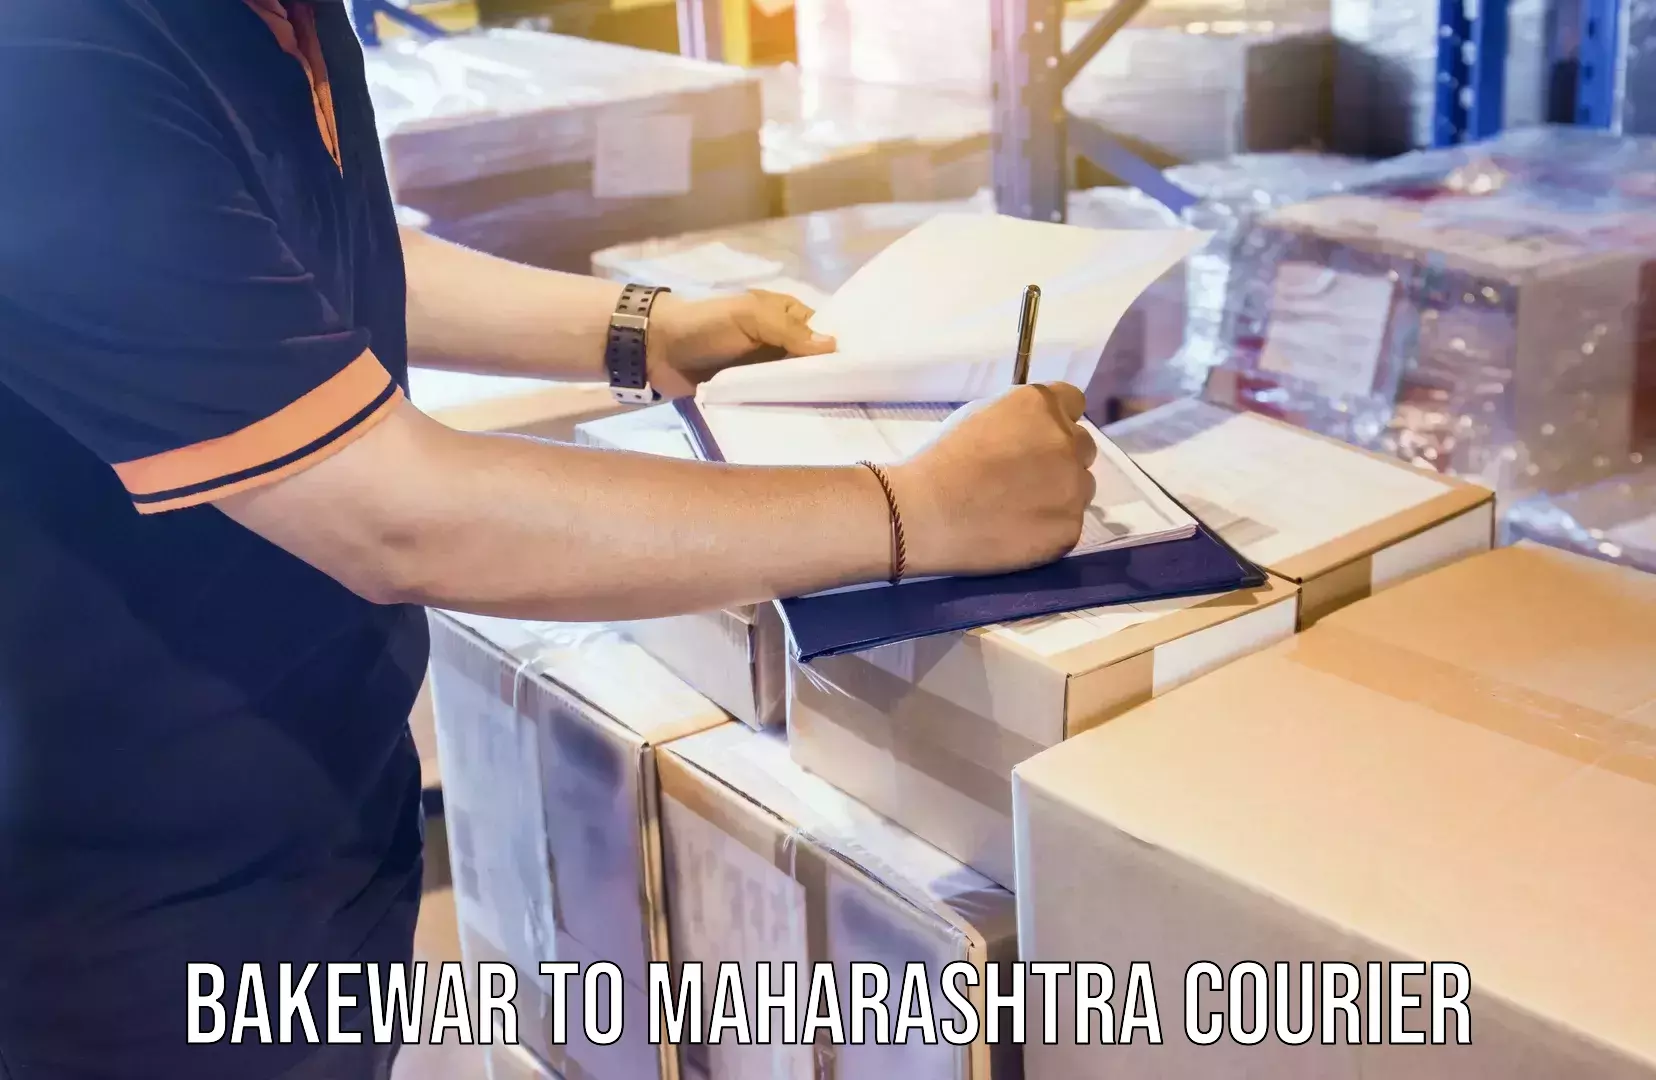 Global courier networks in Bakewar to Maharashtra